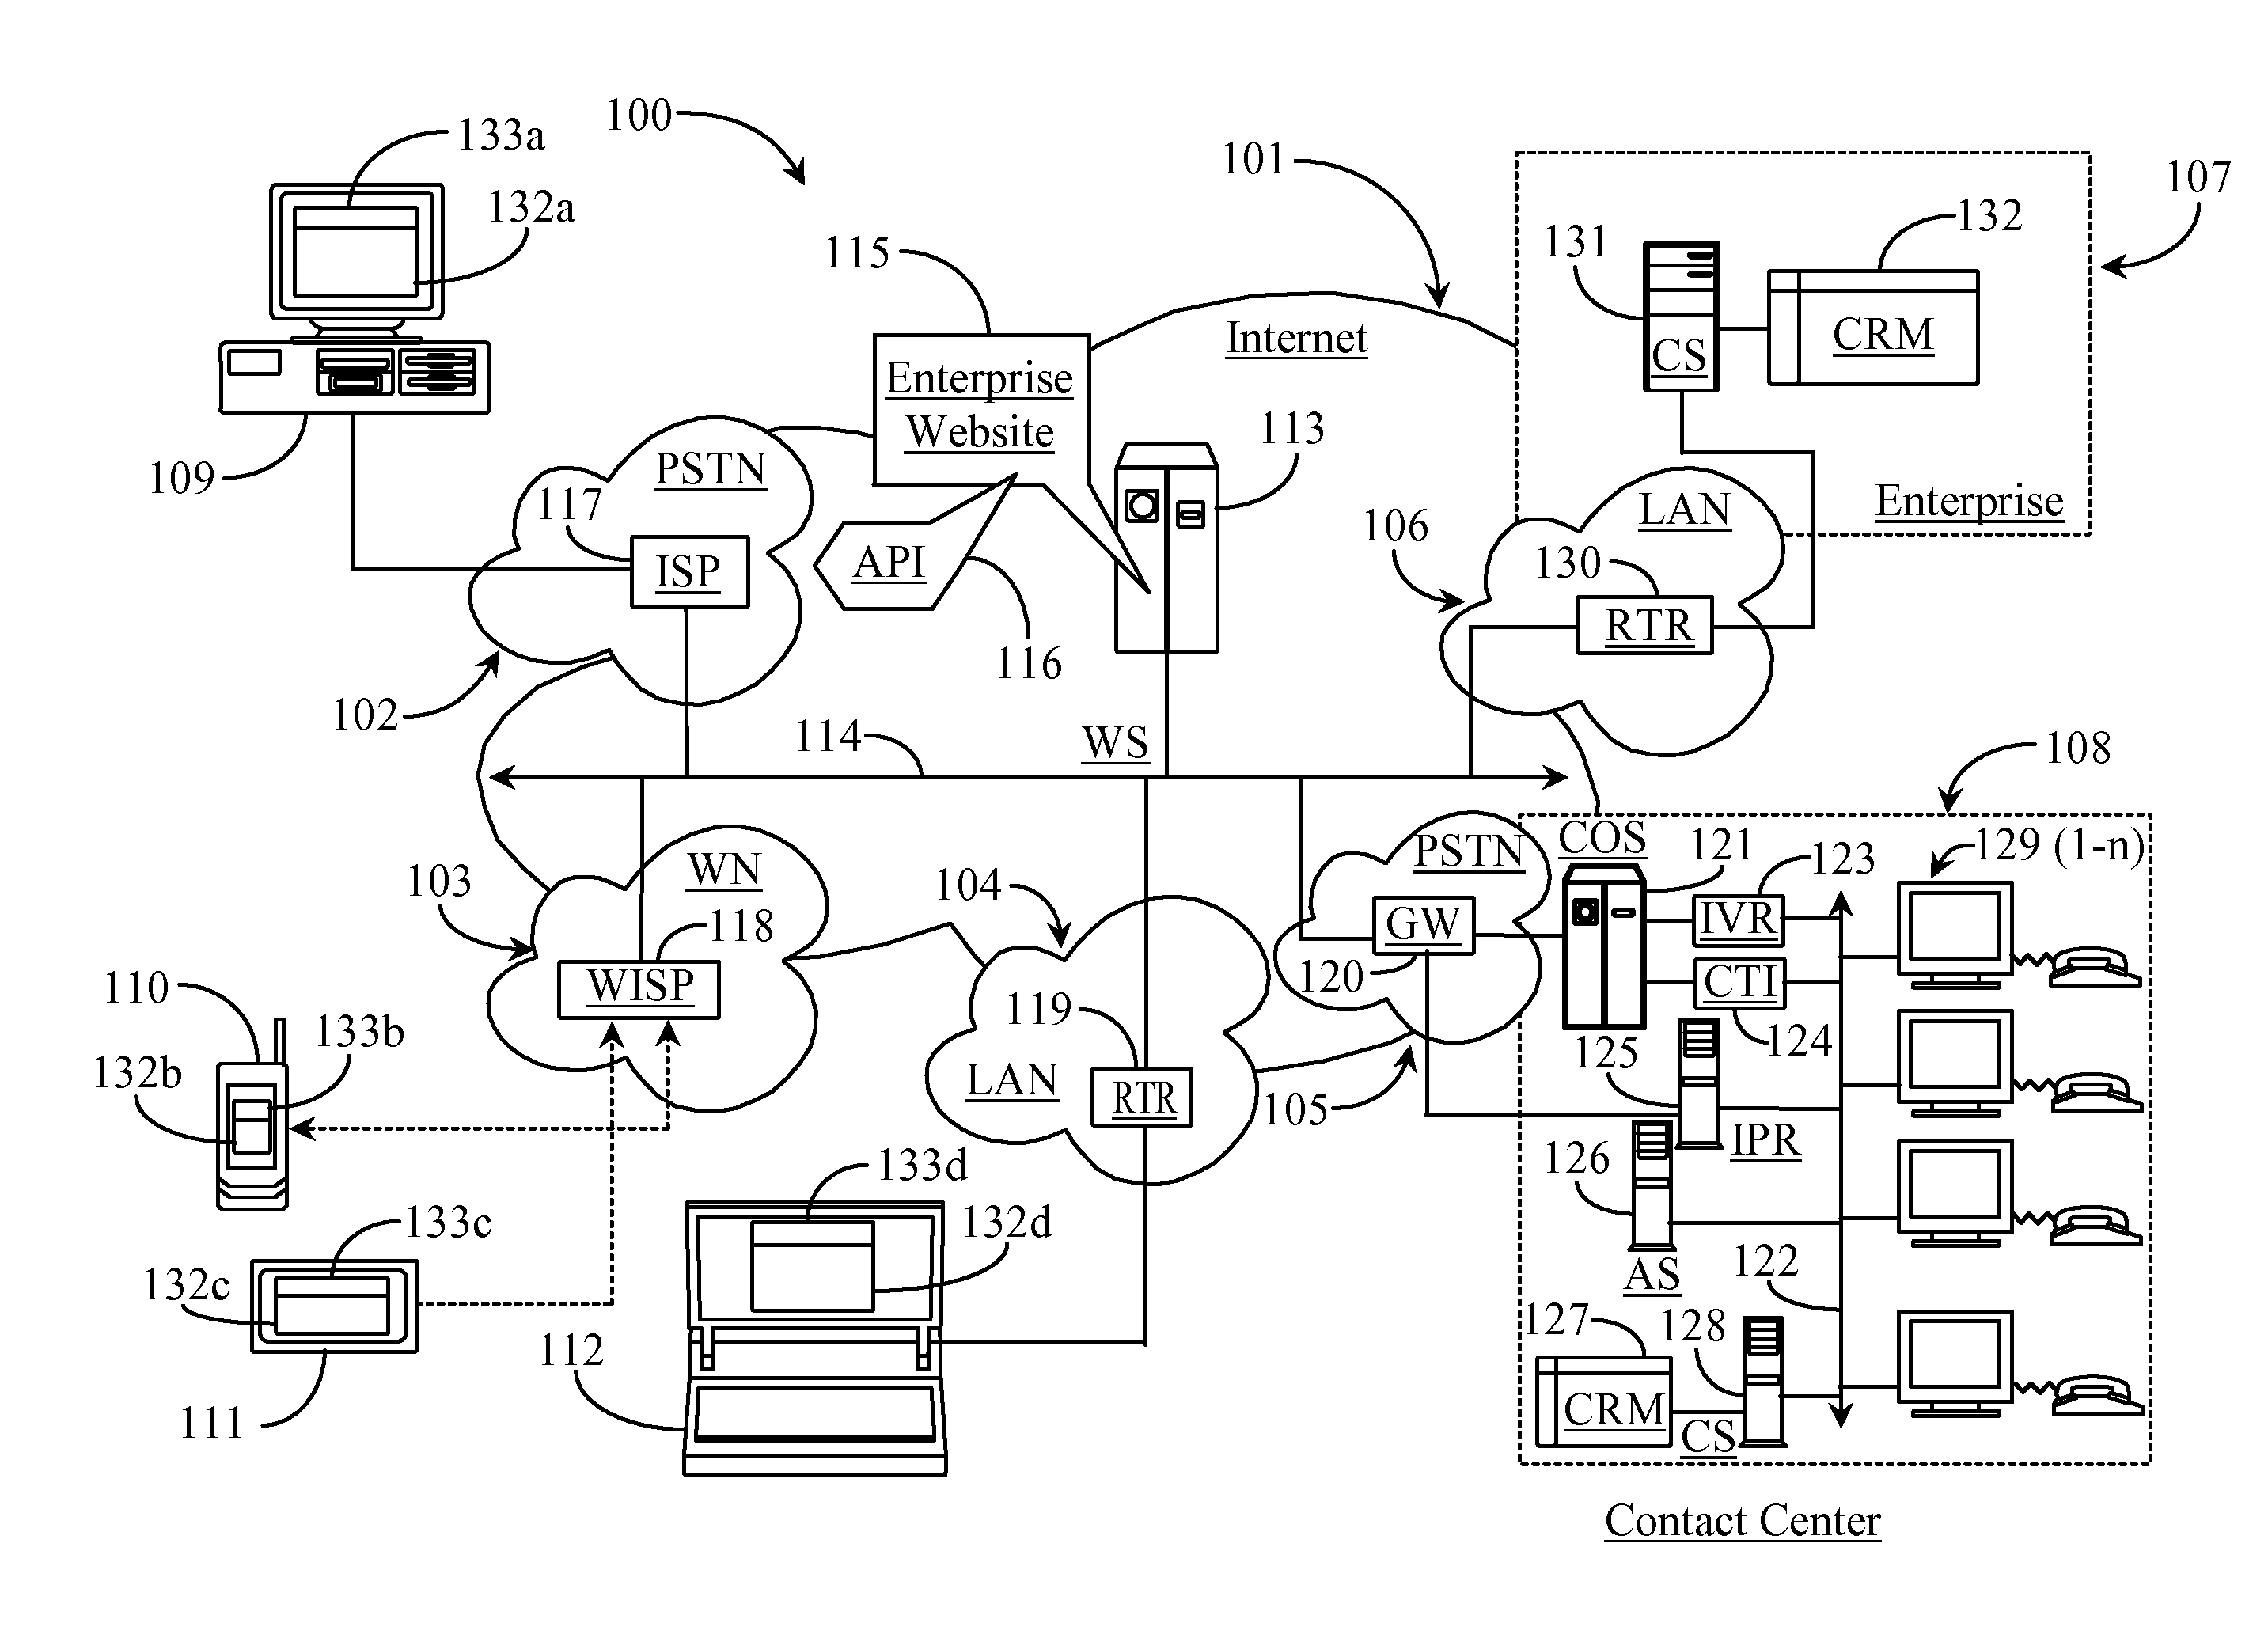 Network-Based Information and Advertising System